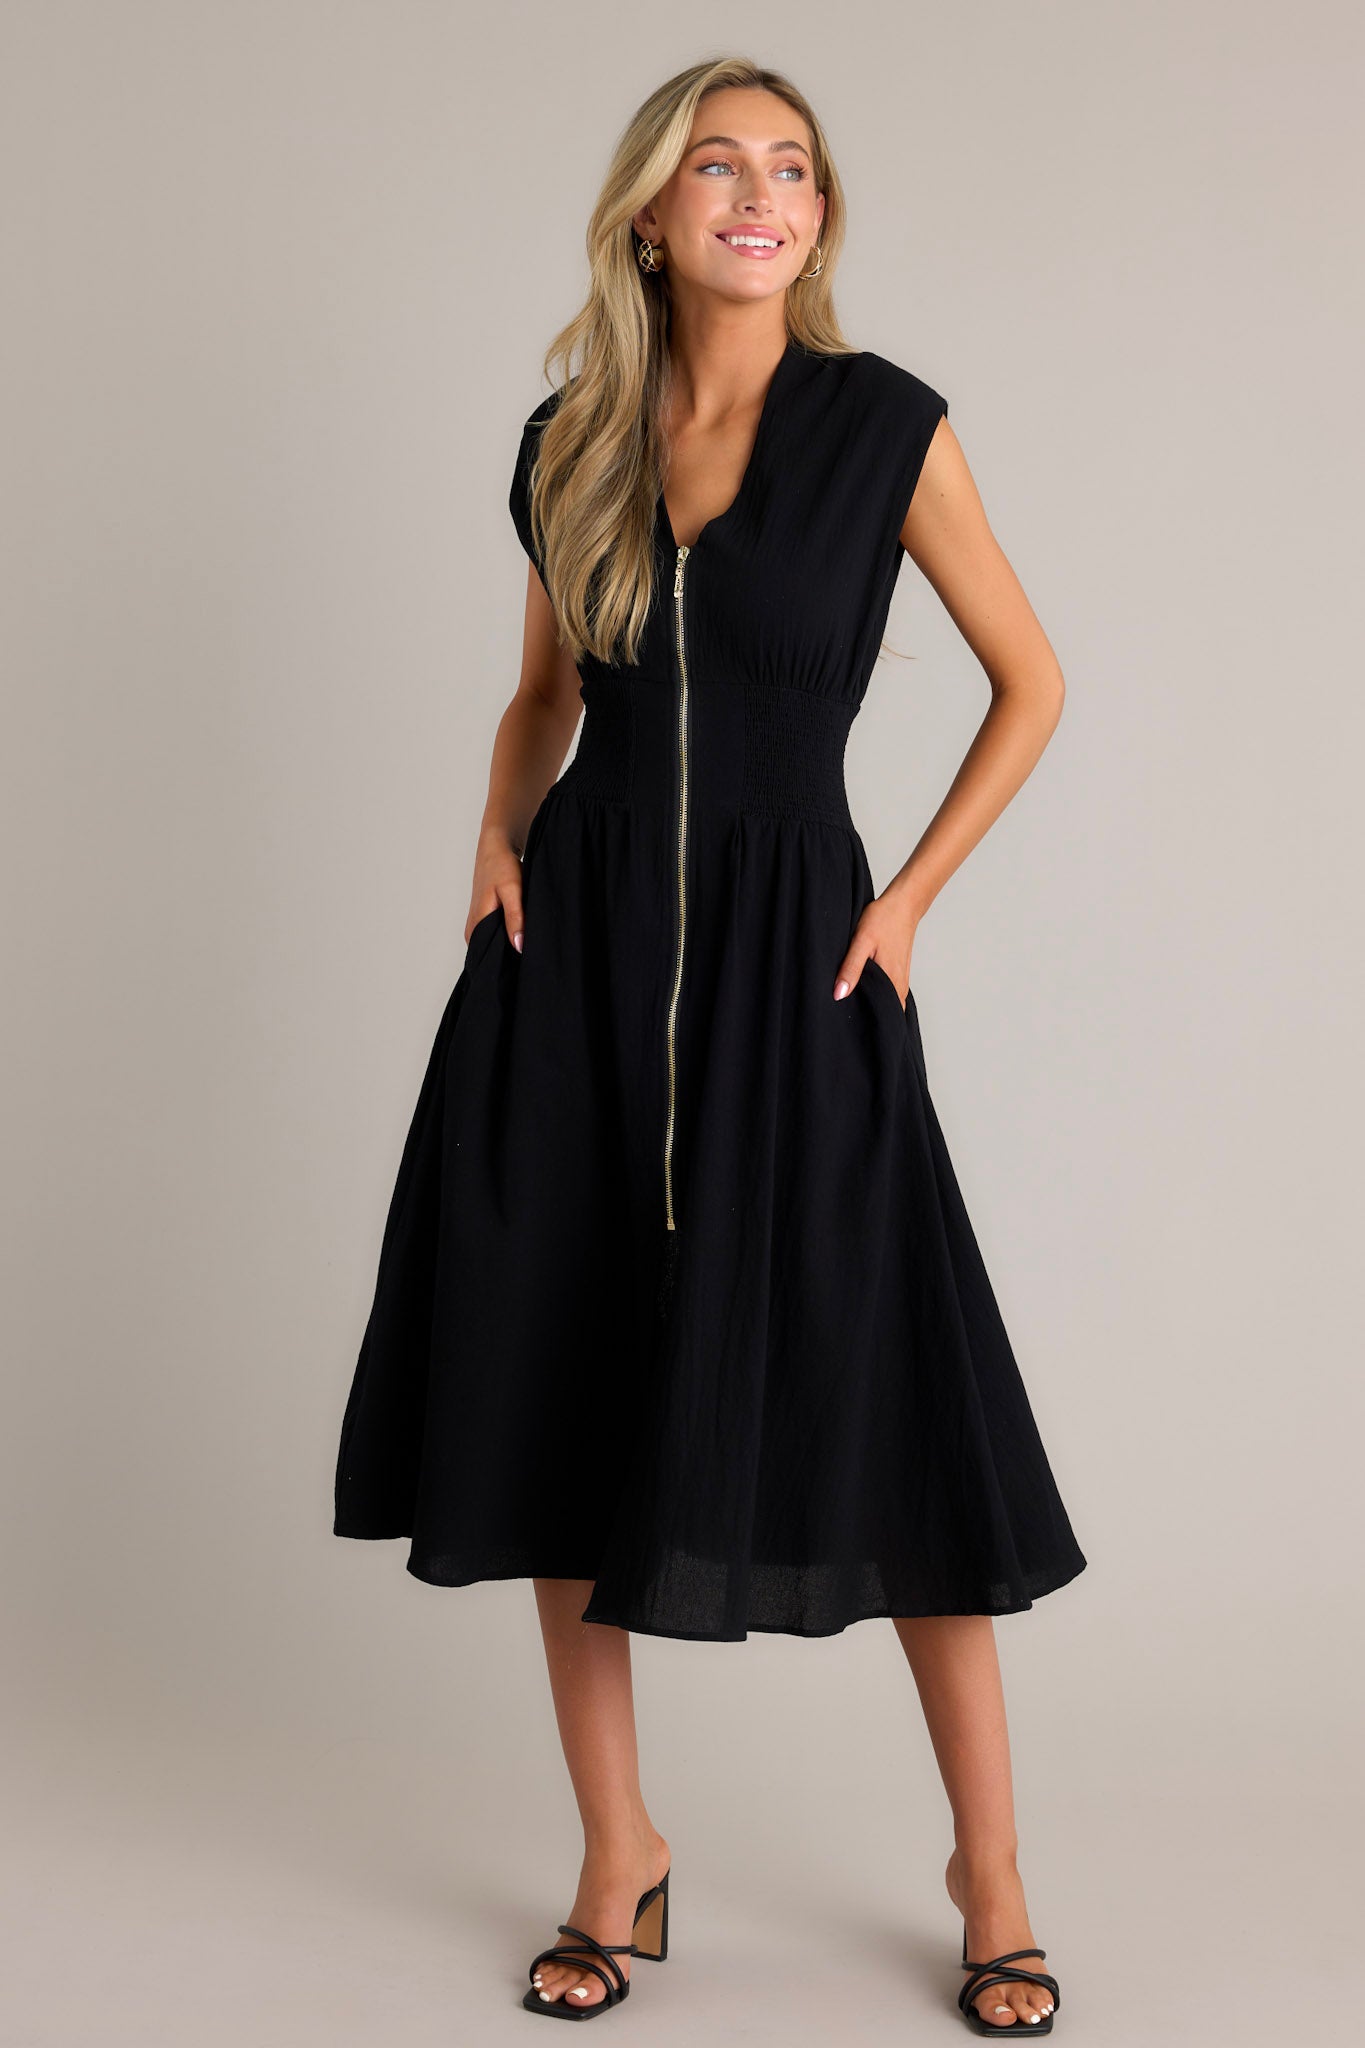 Full length view of a black midi dress with a deep v-neckline, shoulder padding, a functional zipper front, a fully smocked waist, functional pockets, and a front slit